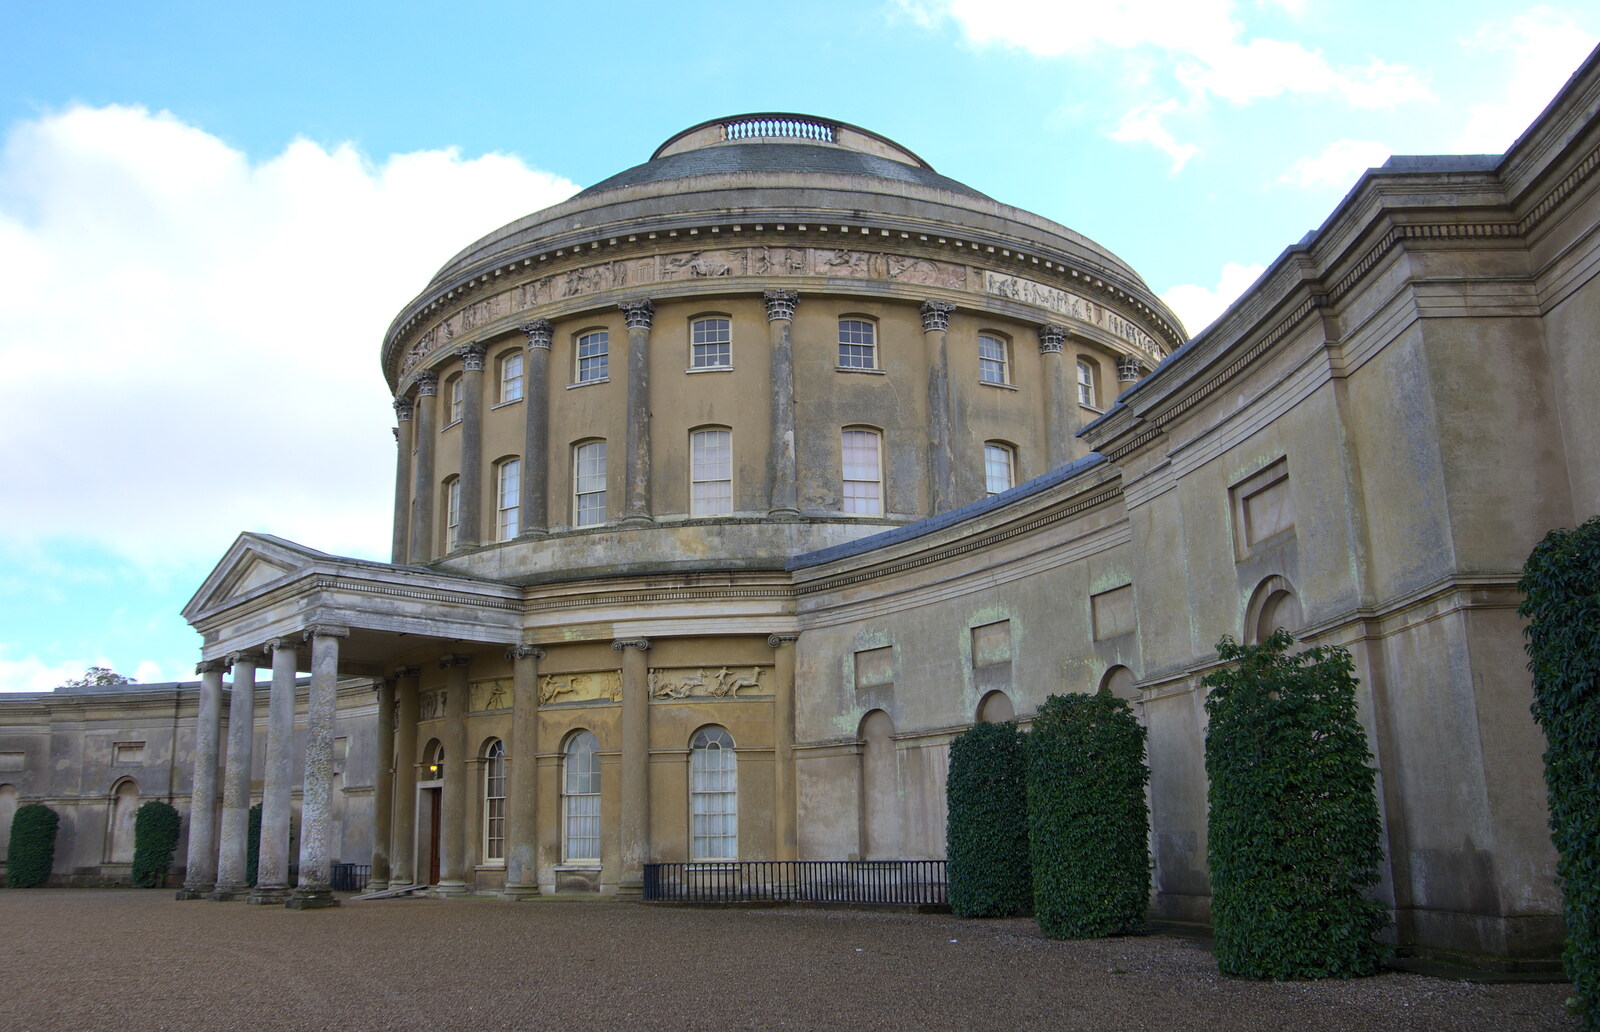 The Ickworth rotunda from Life Below Stairs, Ickworth House, Horringer, Suffolk - 28th January 2018